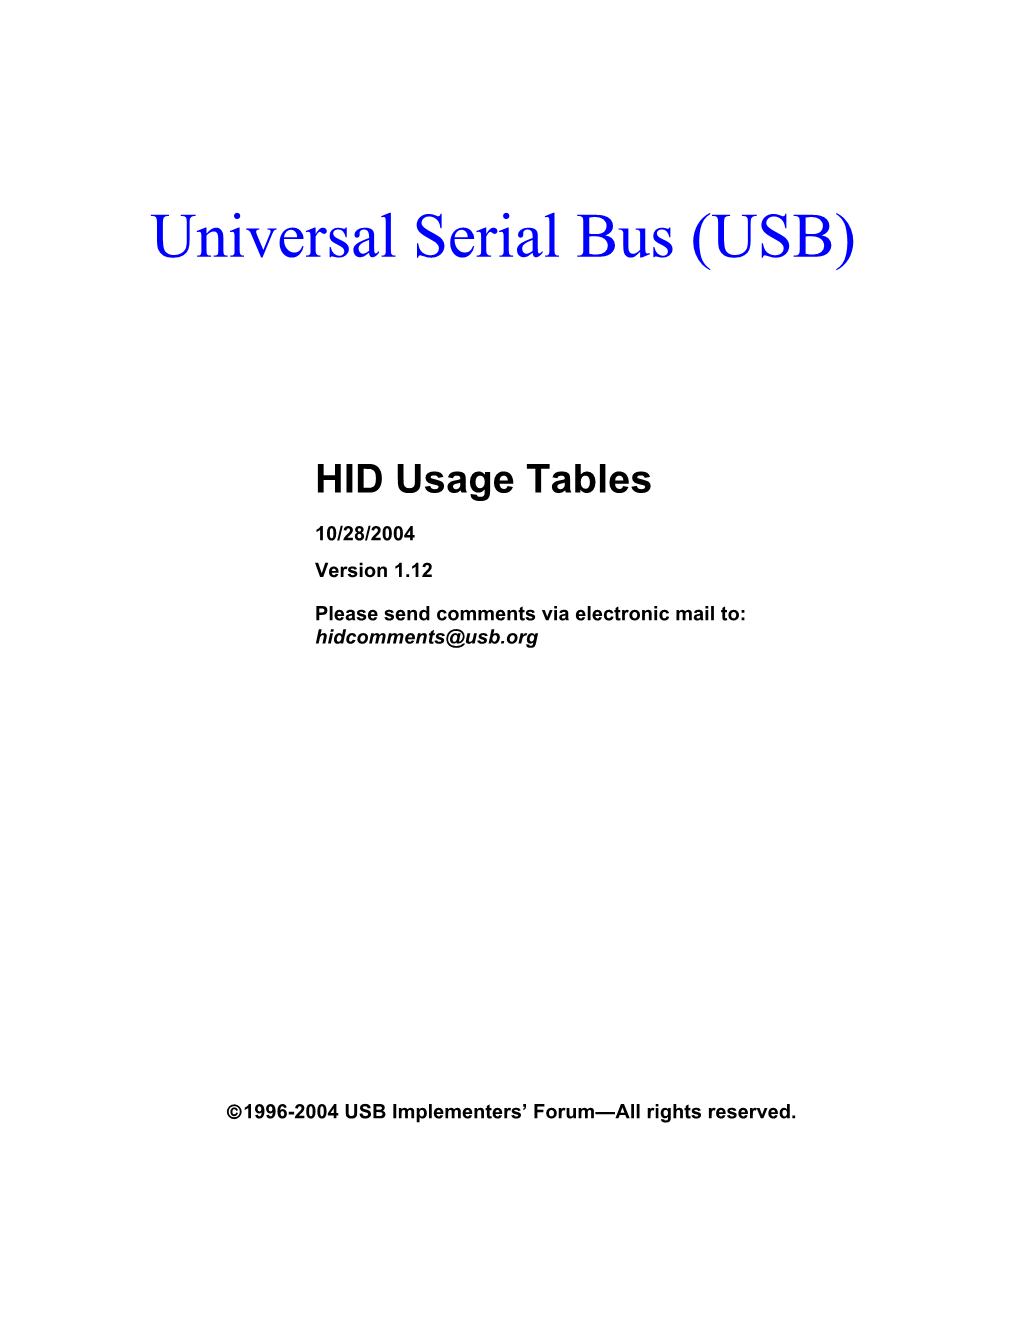 Universal Serial Bus HID Usage Tables